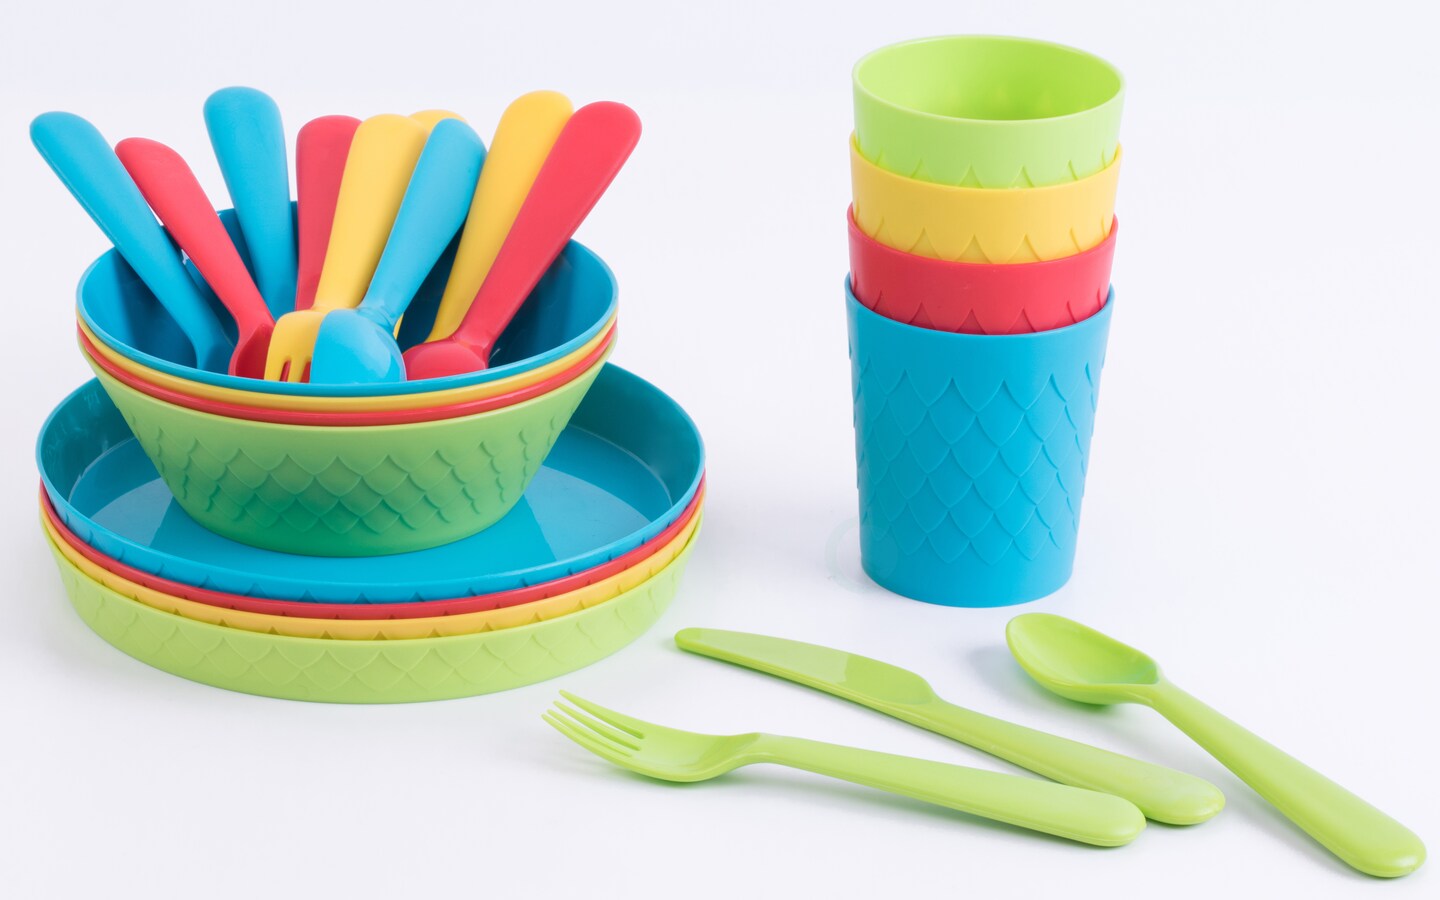 24-Piece Kids Dinnerware Set Plastic 4 Plates, 4 Bowls, 4 Cups, 4 Forks, 4 Knives, and 4 Spoons